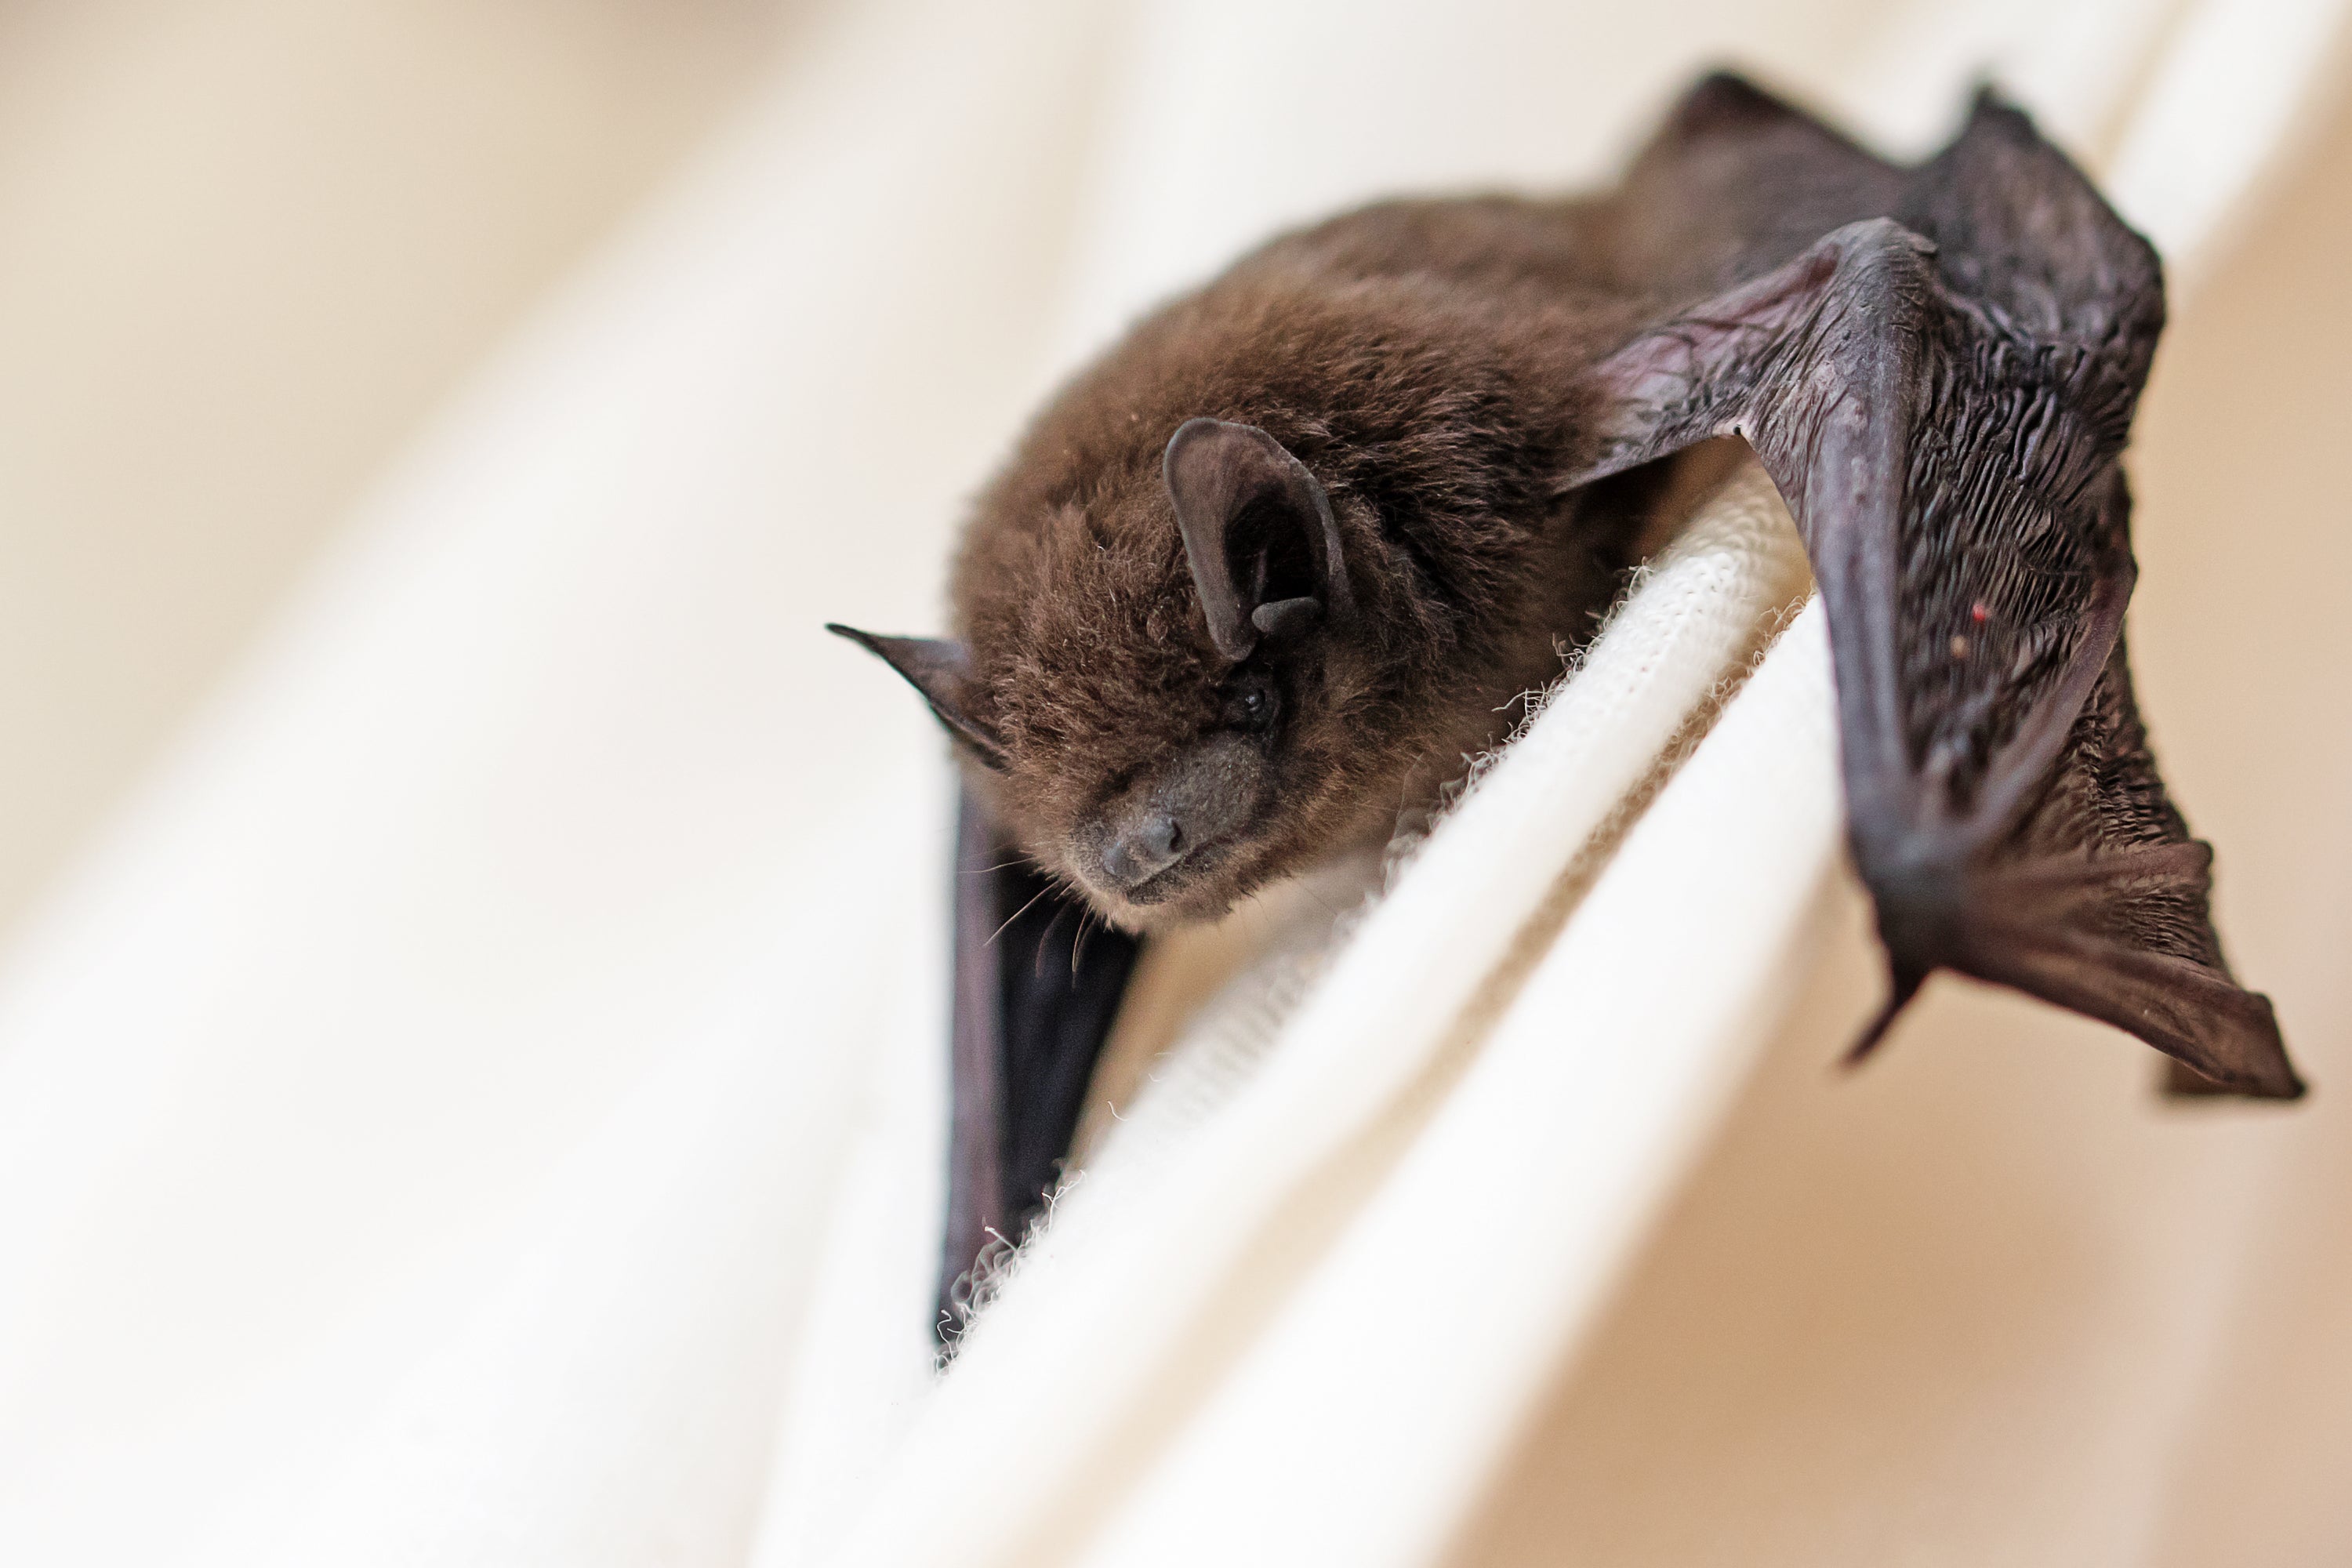 Bat viruses found in Laos, Cambodia, China and Thailand may help researchers anticipate future pandemics